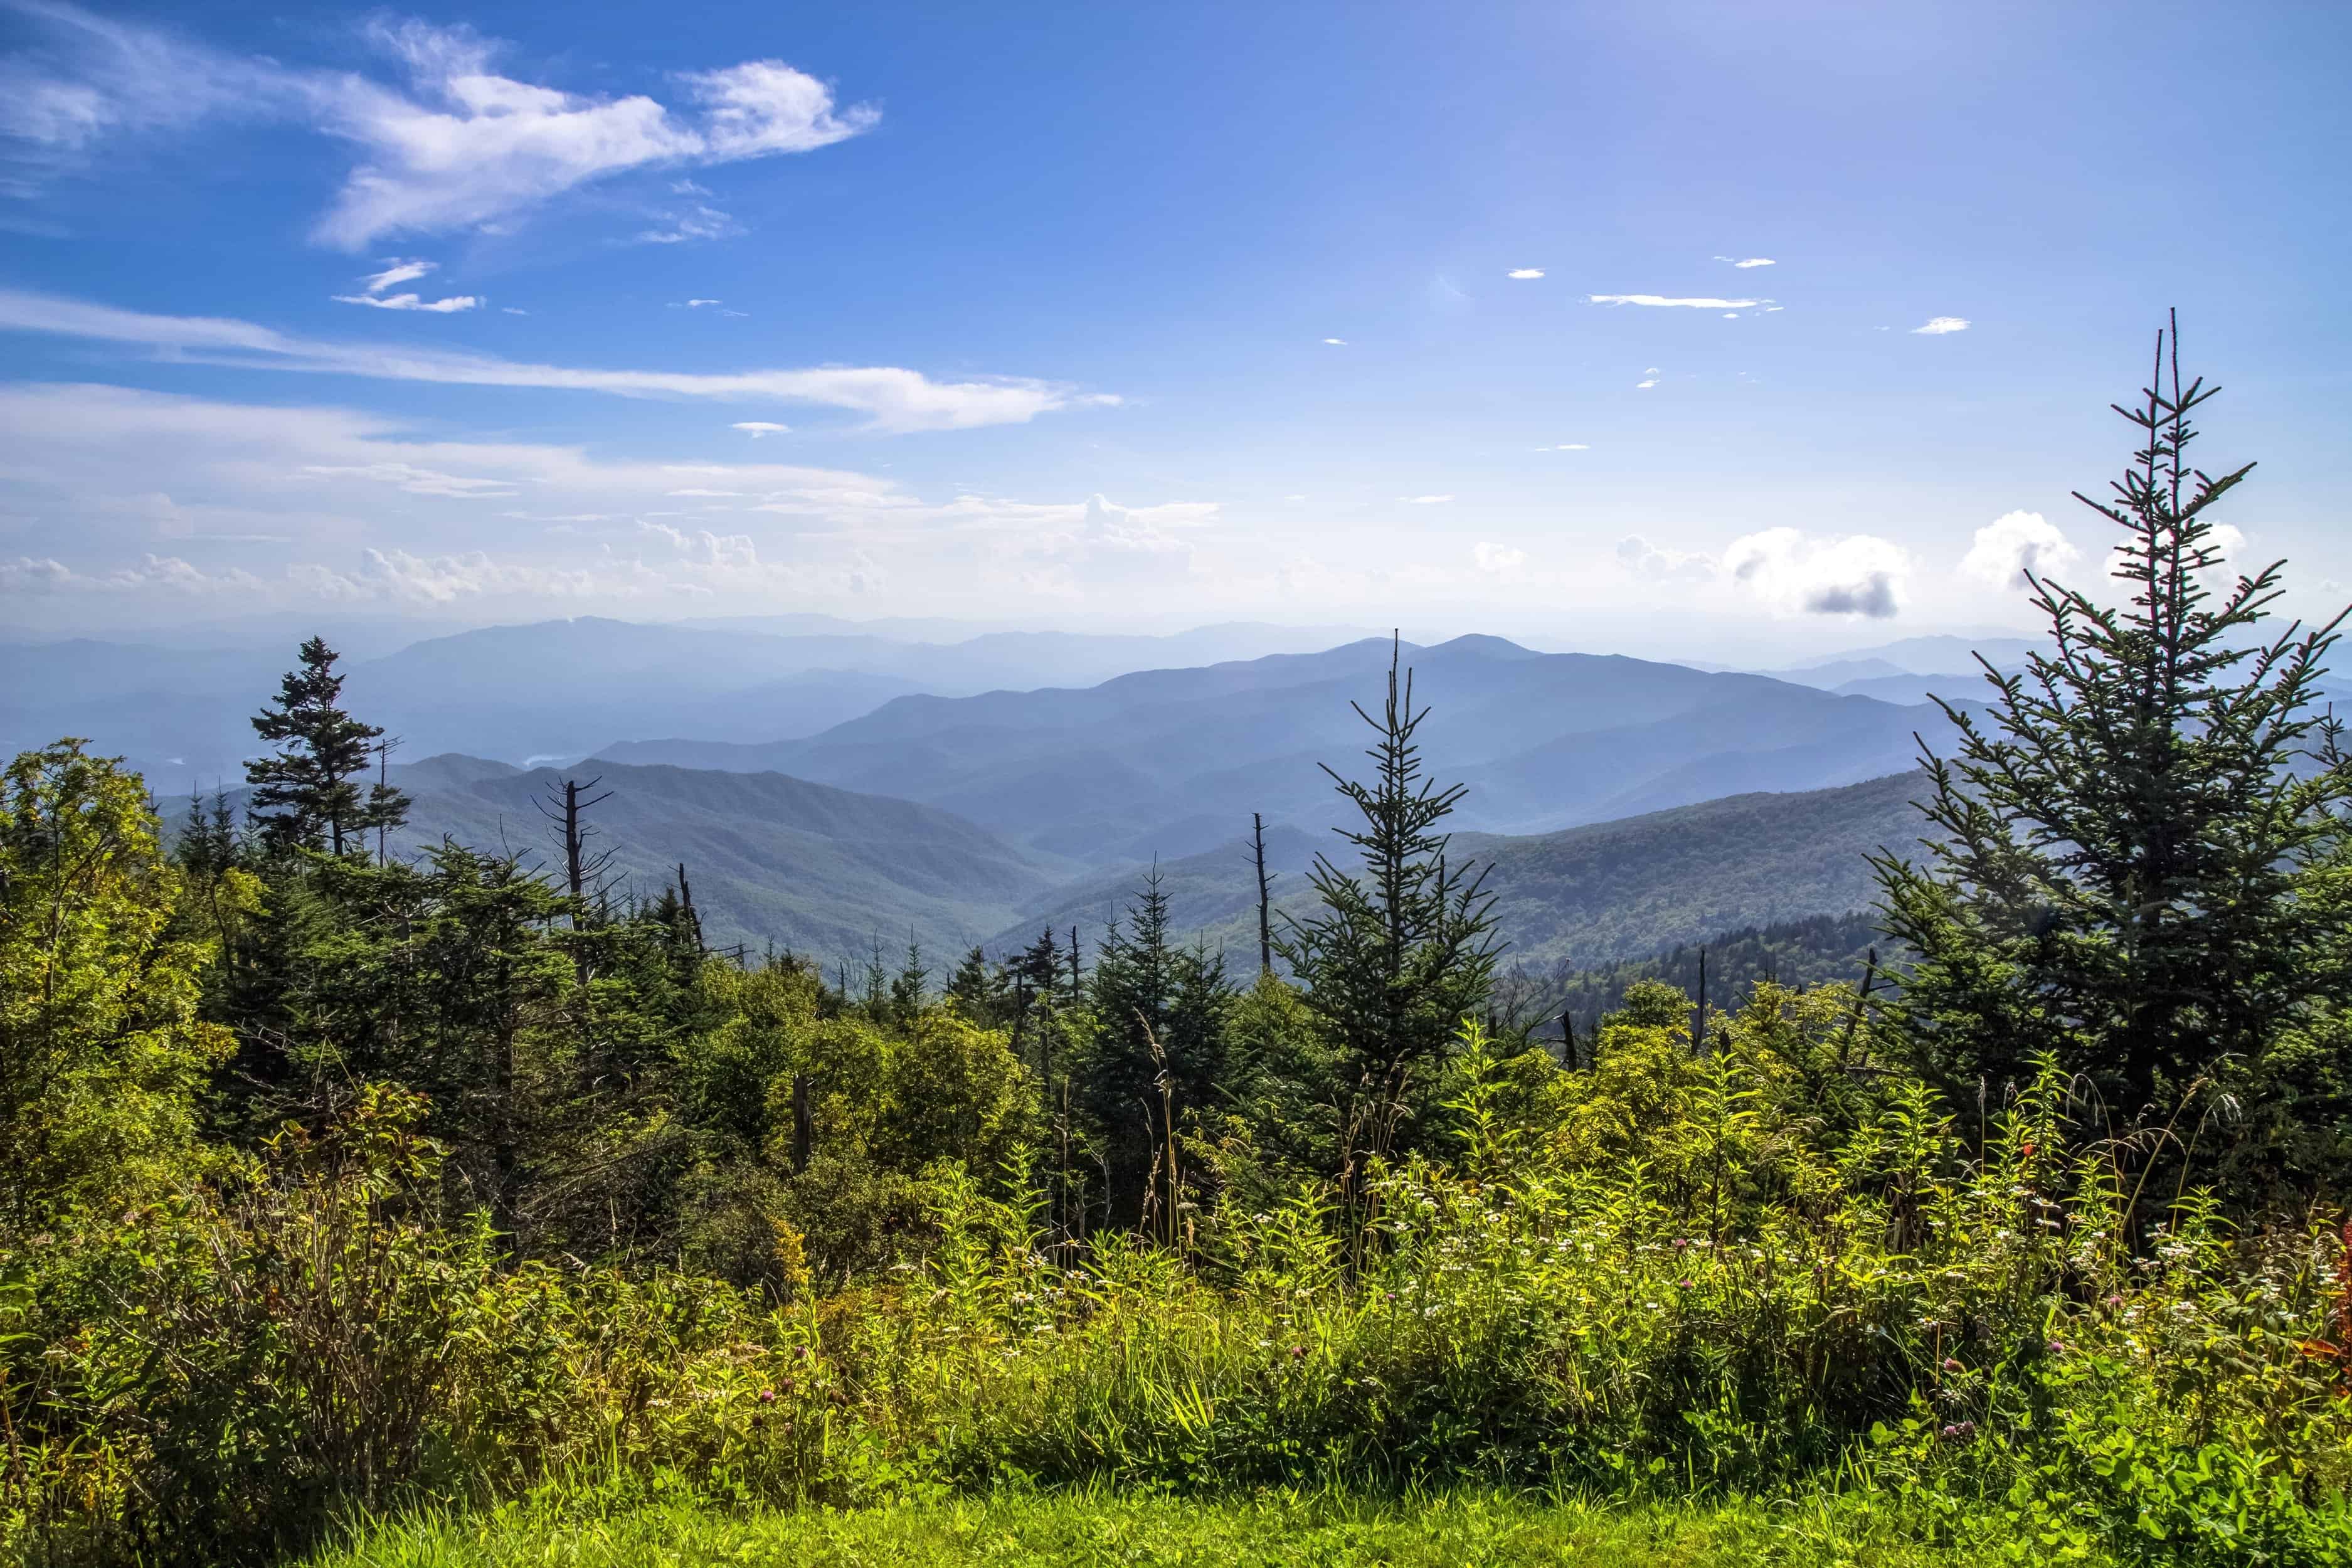 Top 4 Places to Visit for the Best Views in the Smoky Mountains